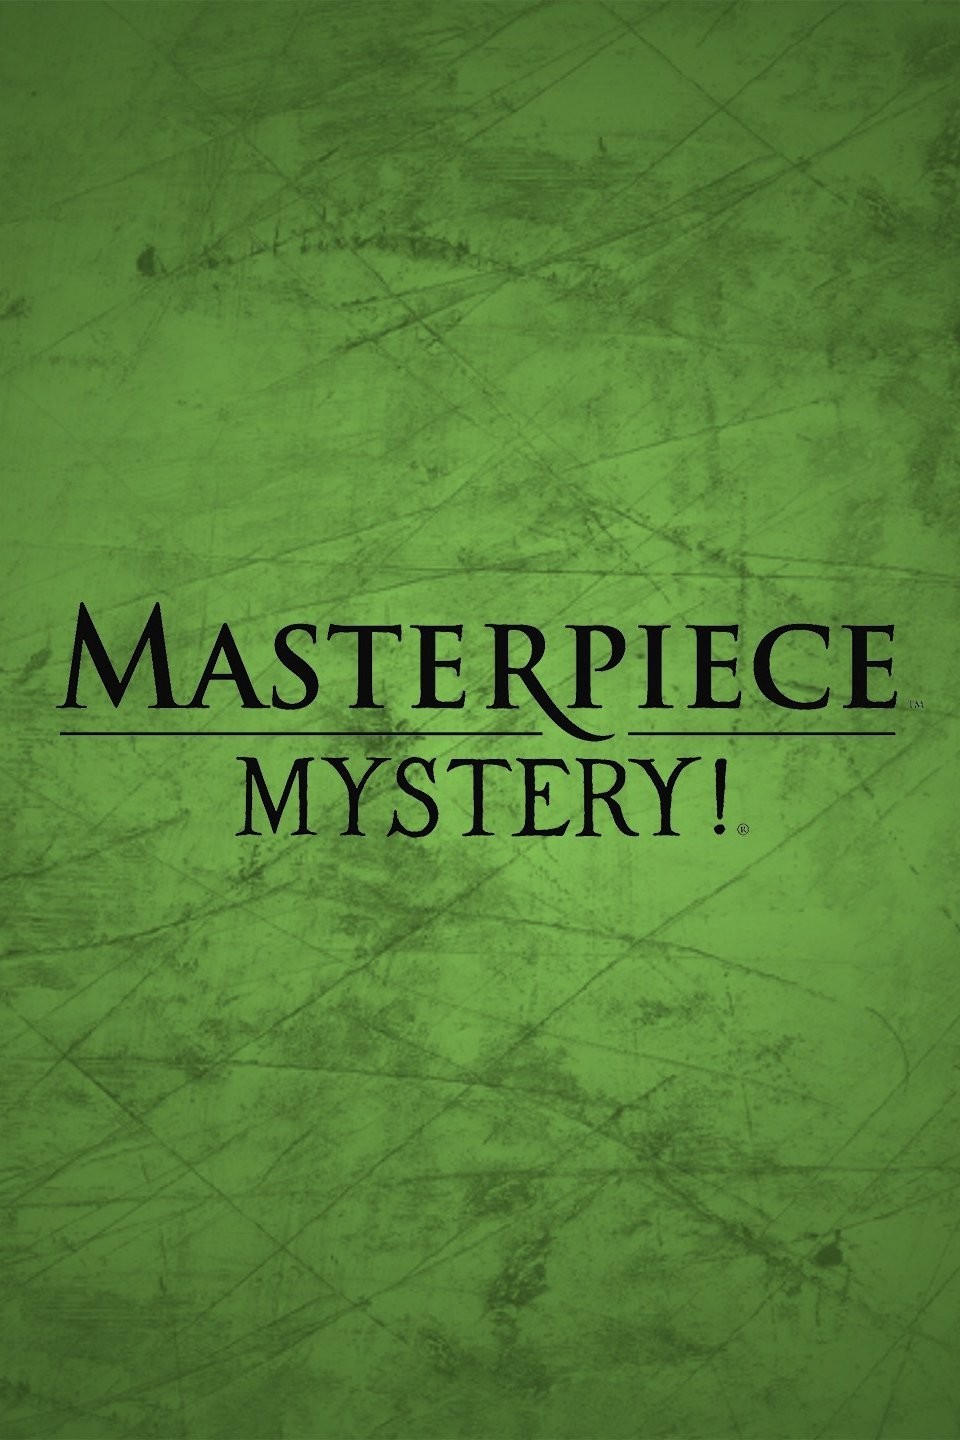 Masterpiece Mystery! Pictures Rotten Tomatoes